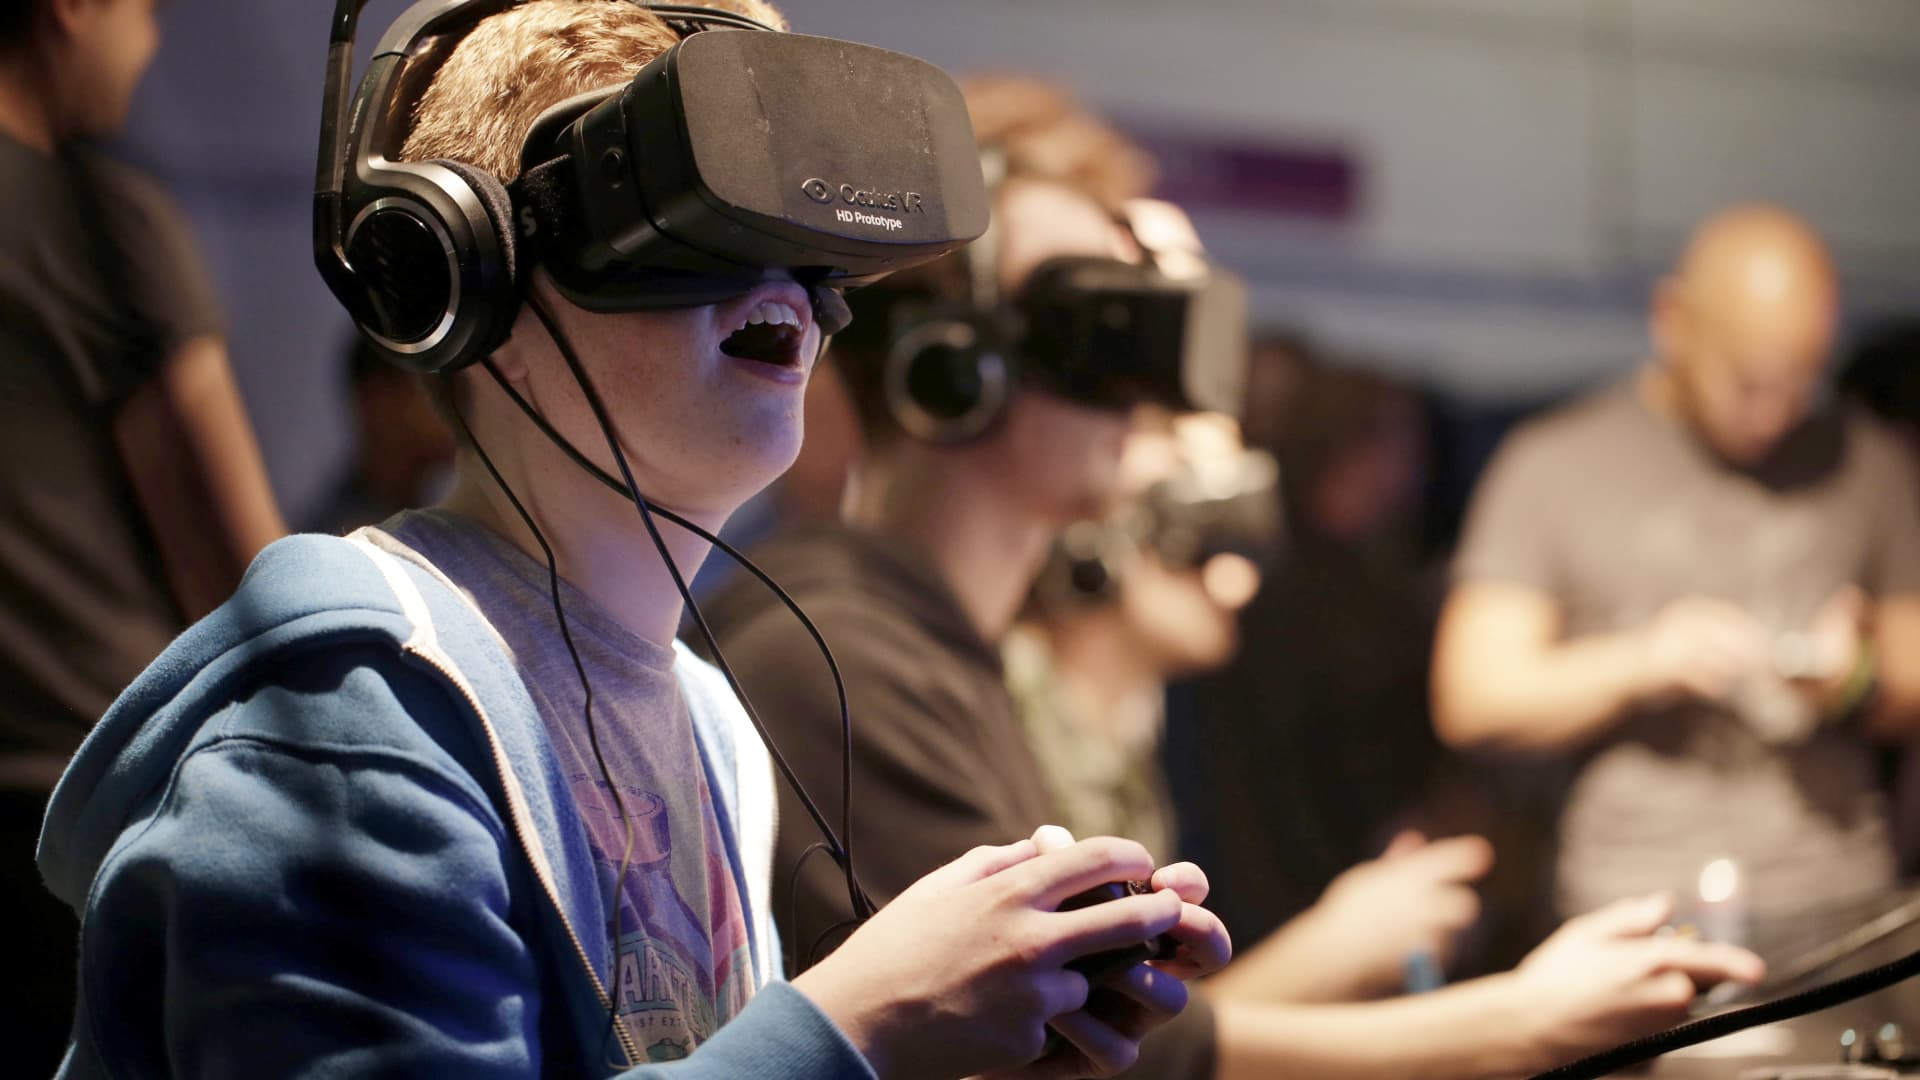 From Gaming to Socializing – How to Get Involved in the Metaverse